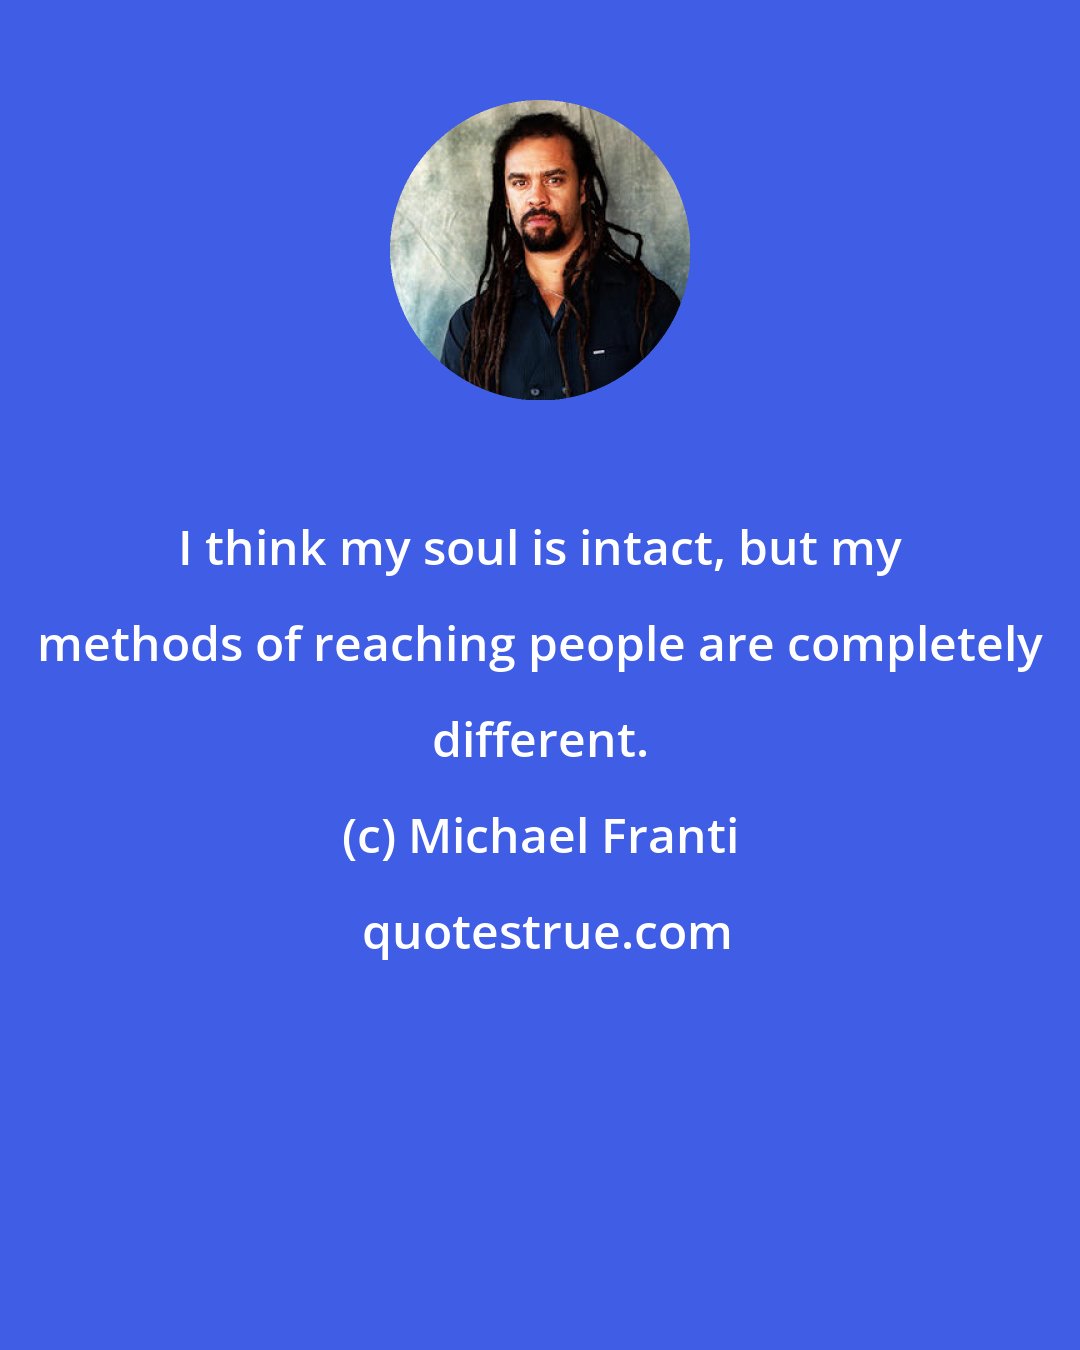 Michael Franti: I think my soul is intact, but my methods of reaching people are completely different.